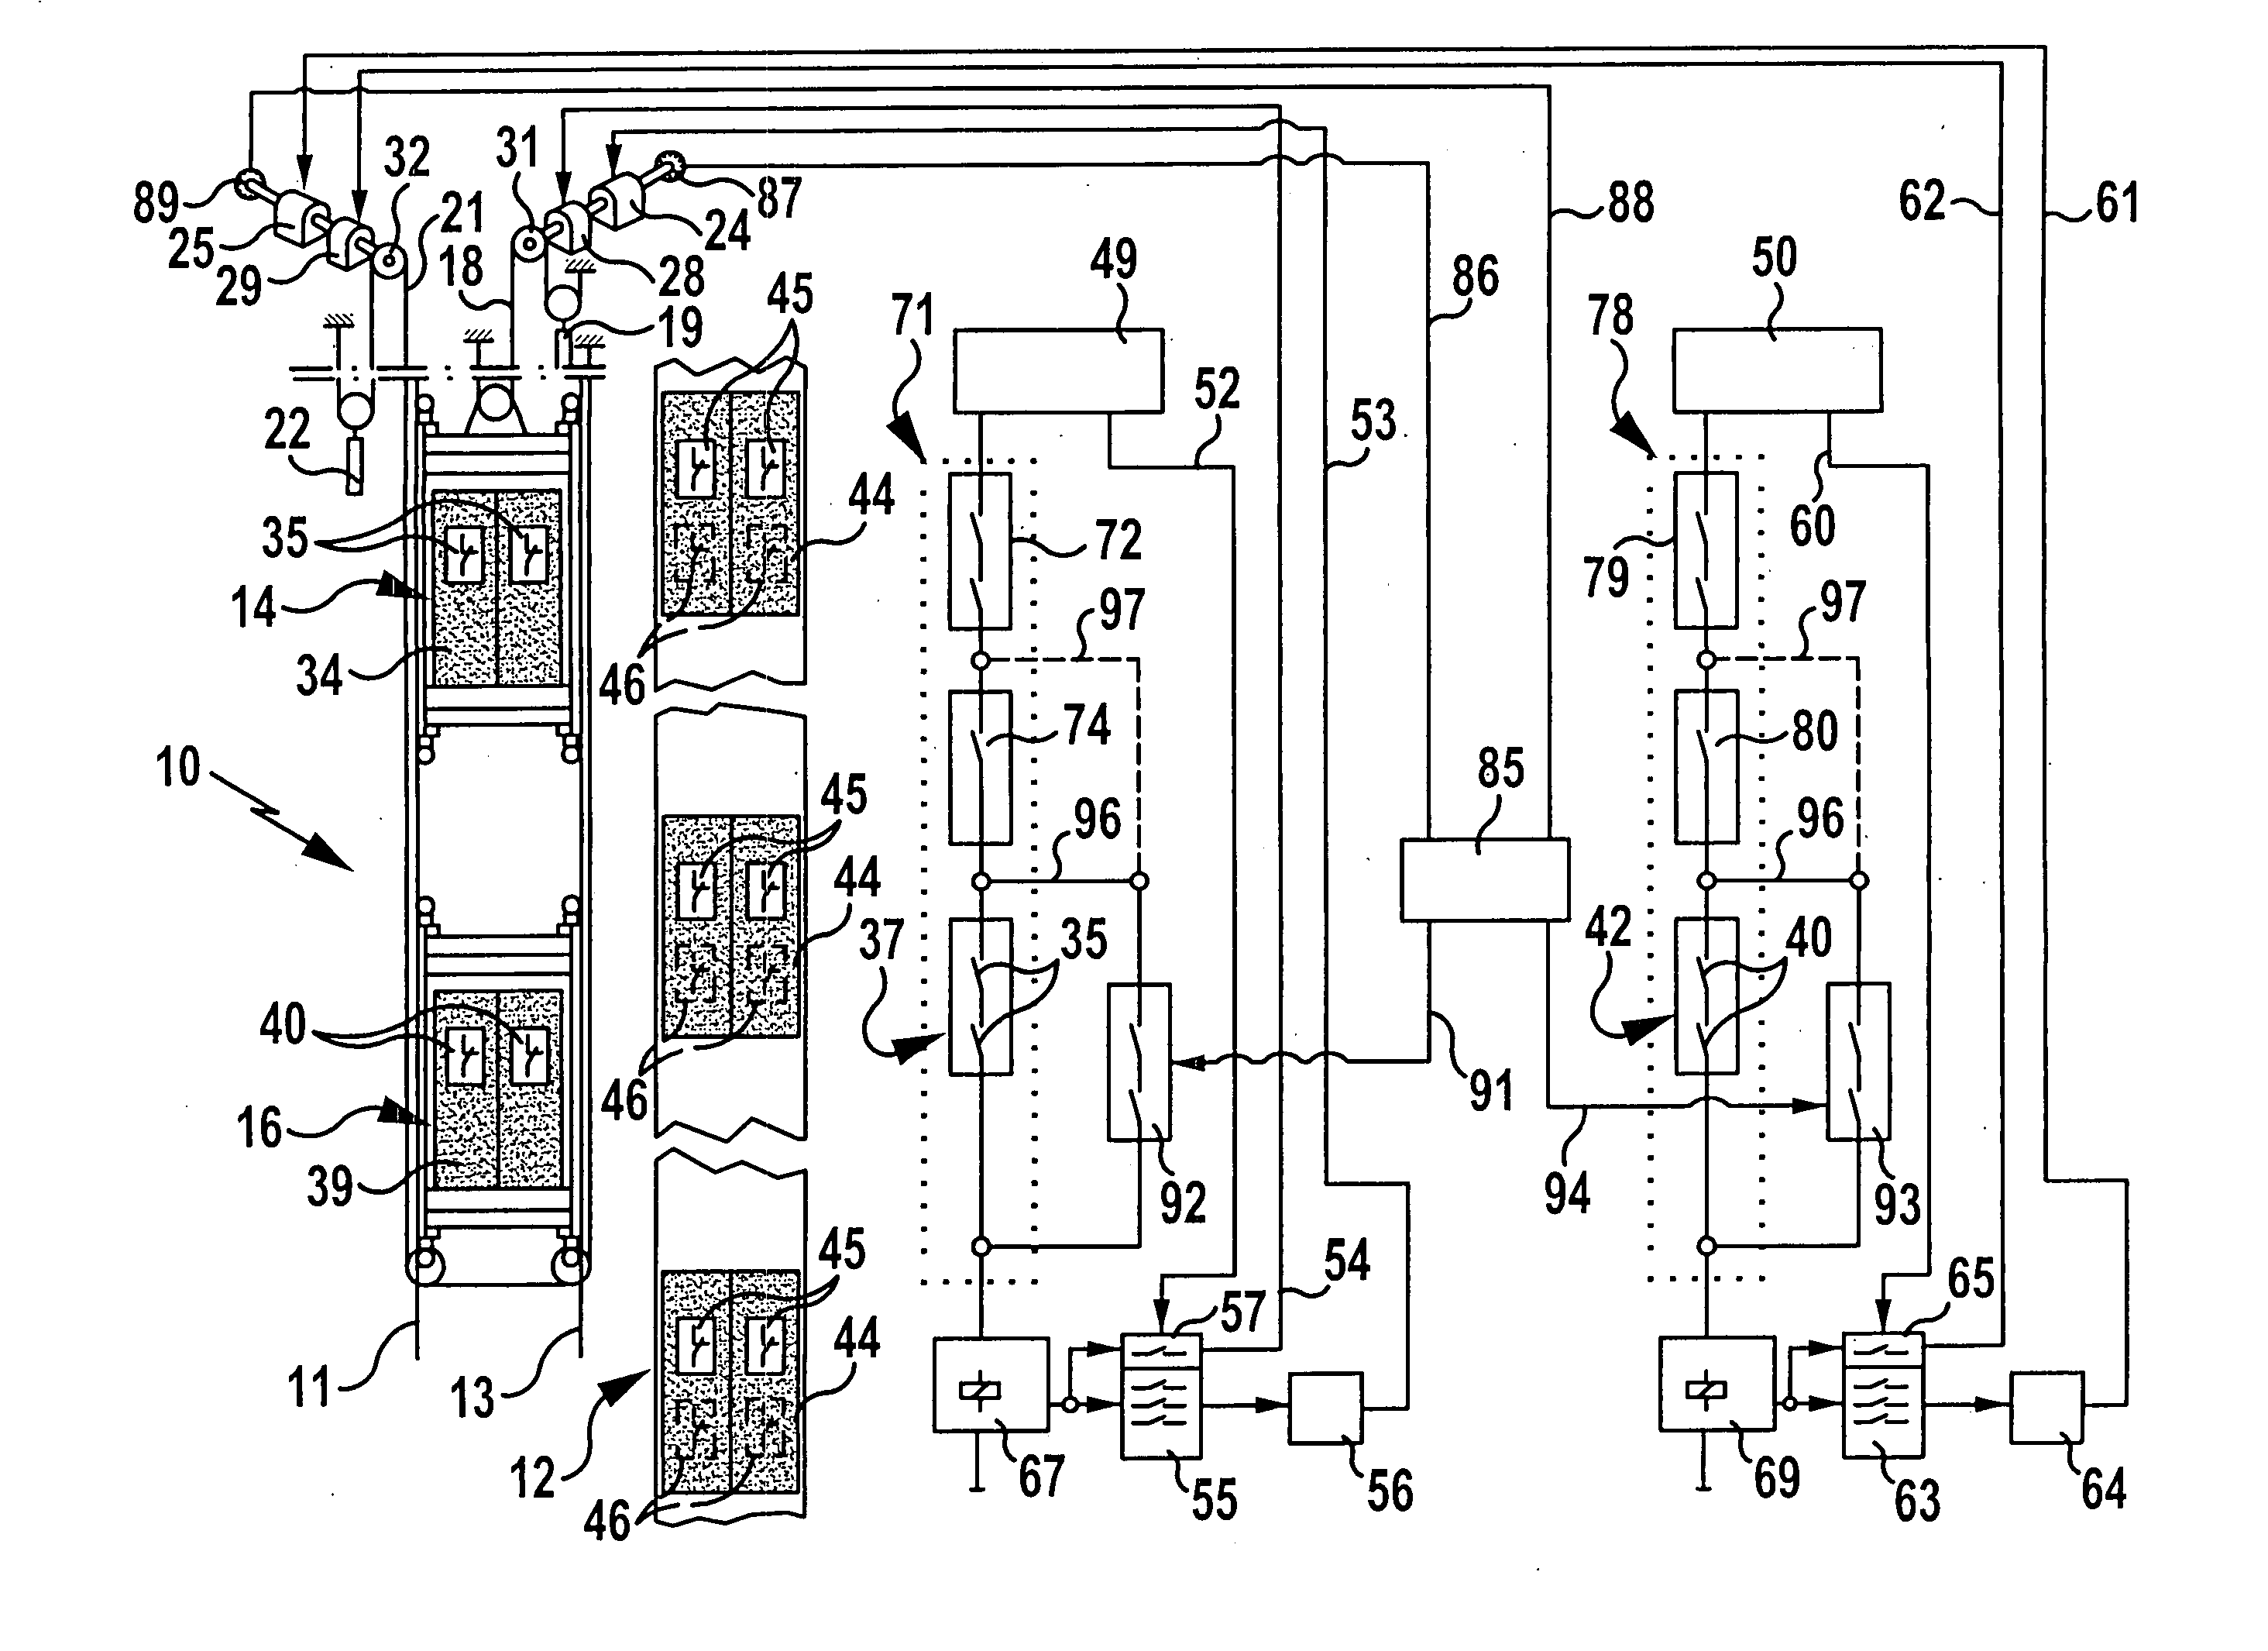 Elevator installation and method for controlling an elevator installation